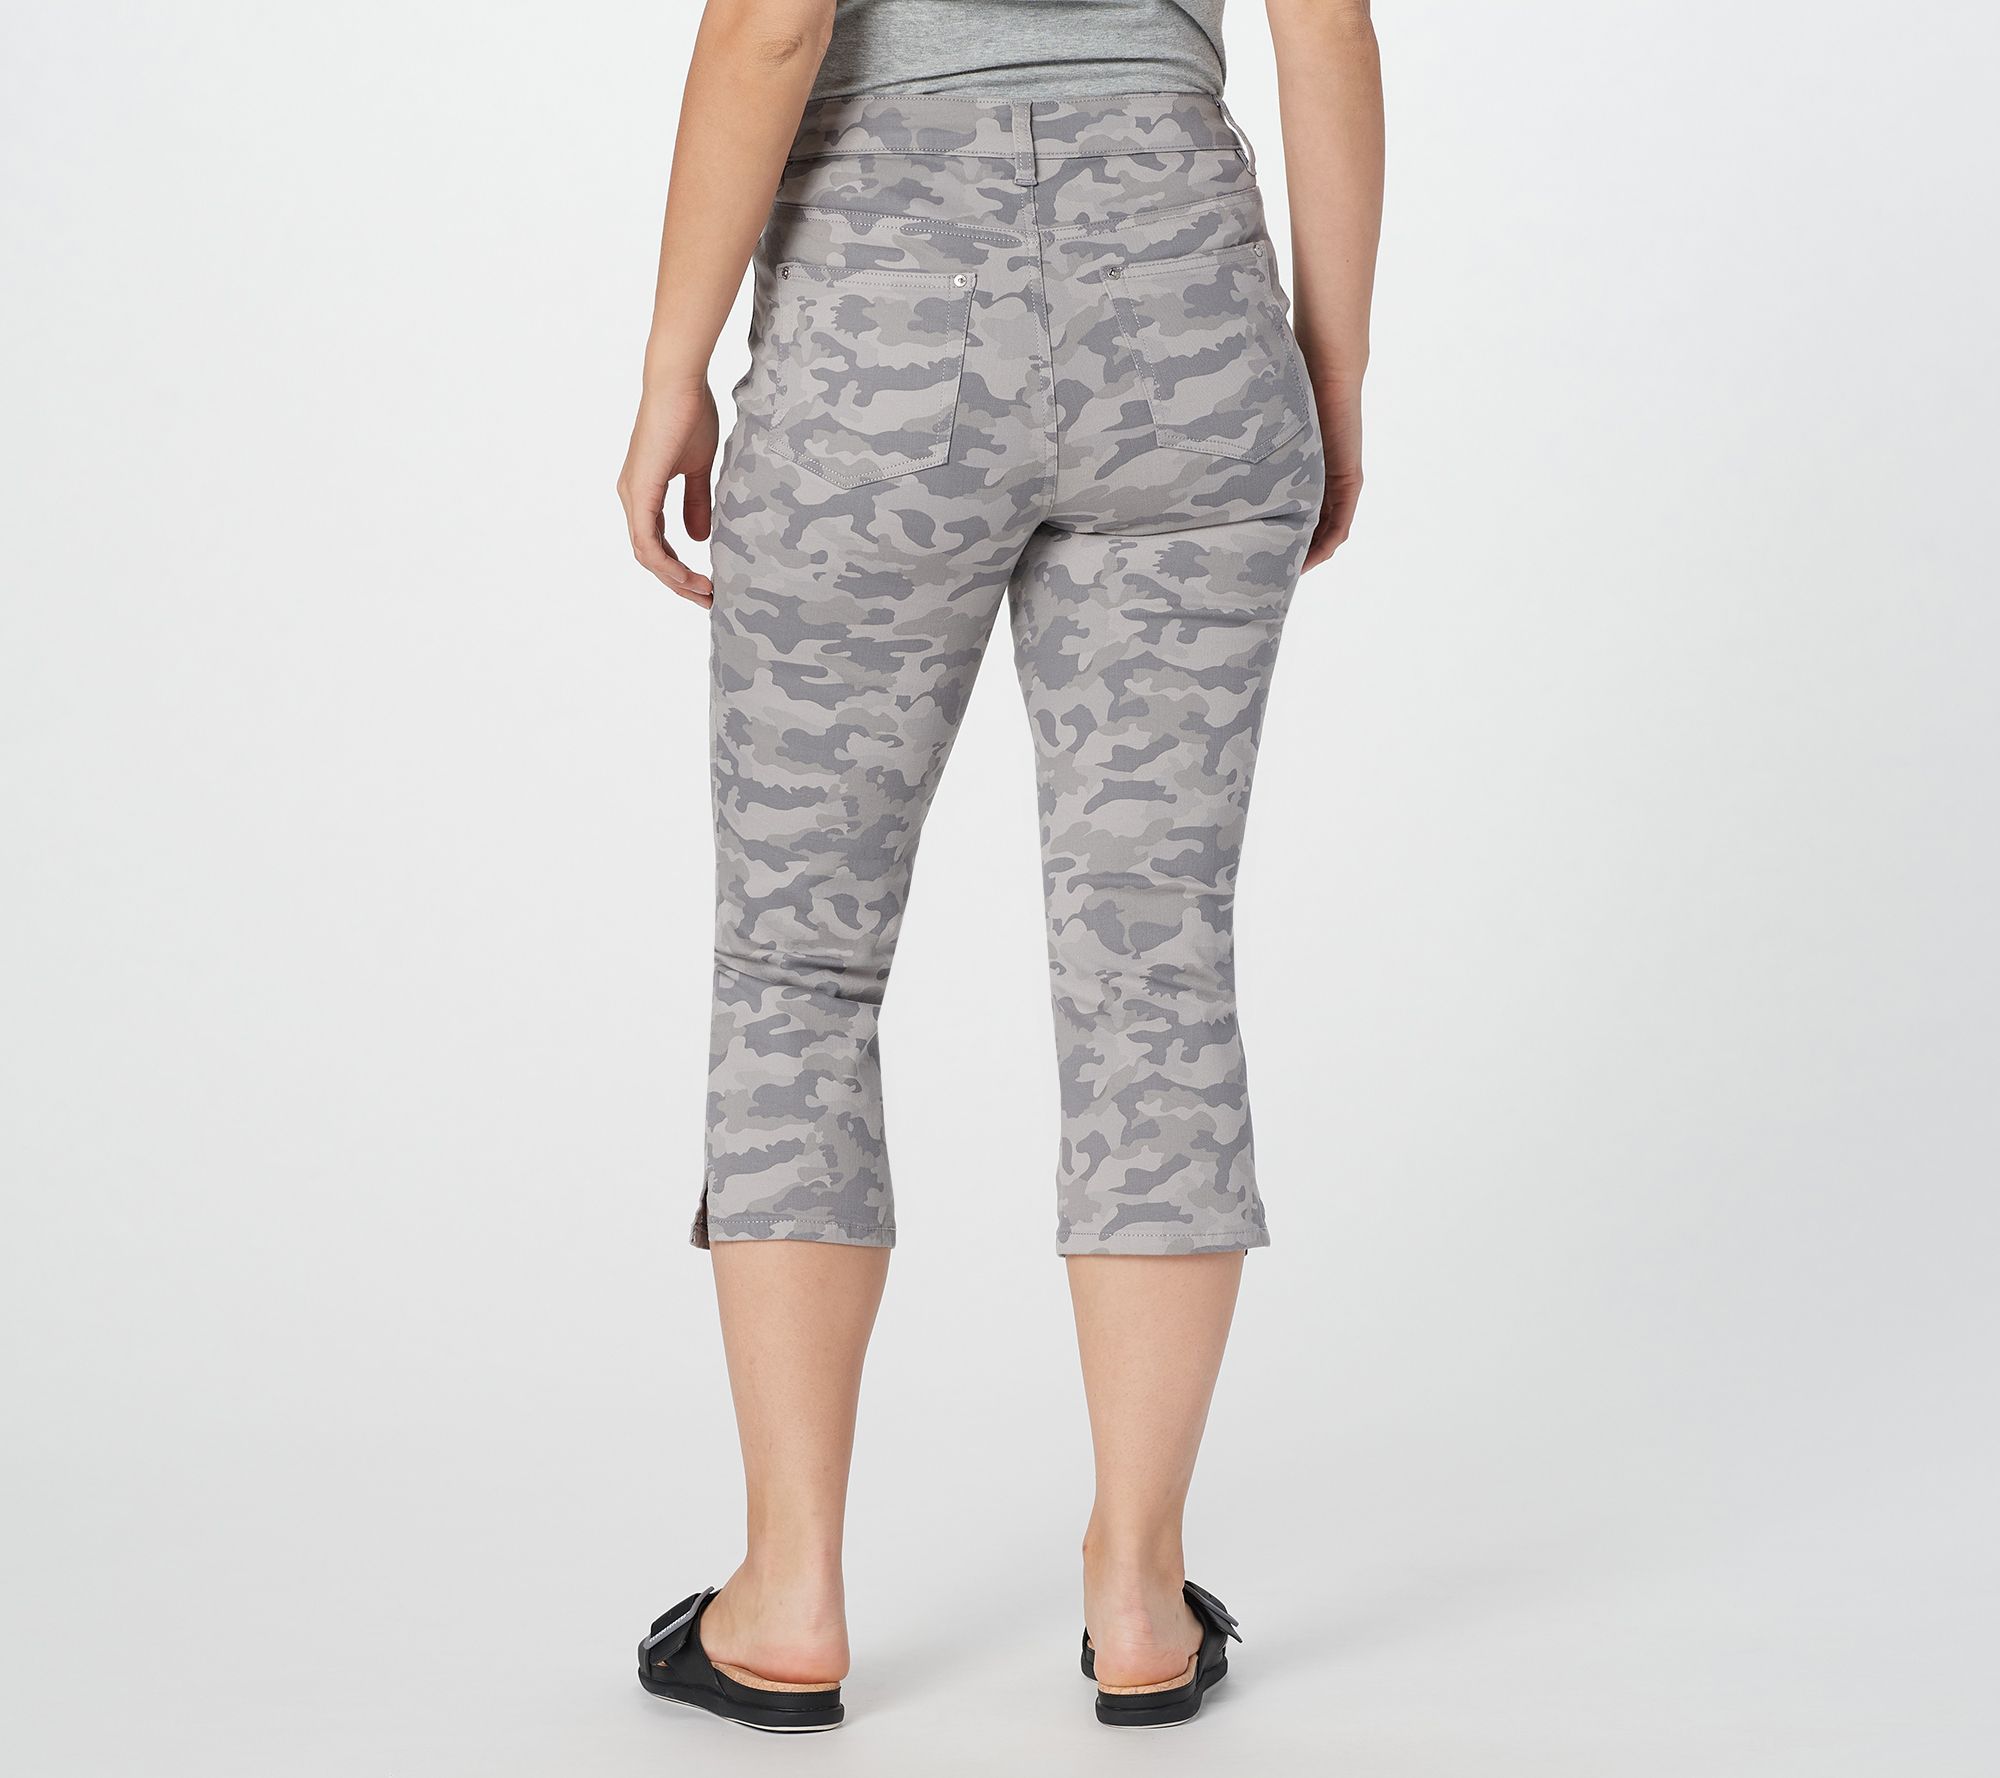 Belle by Kim Gravel TripleLuxe Twill Camo Printed Capris